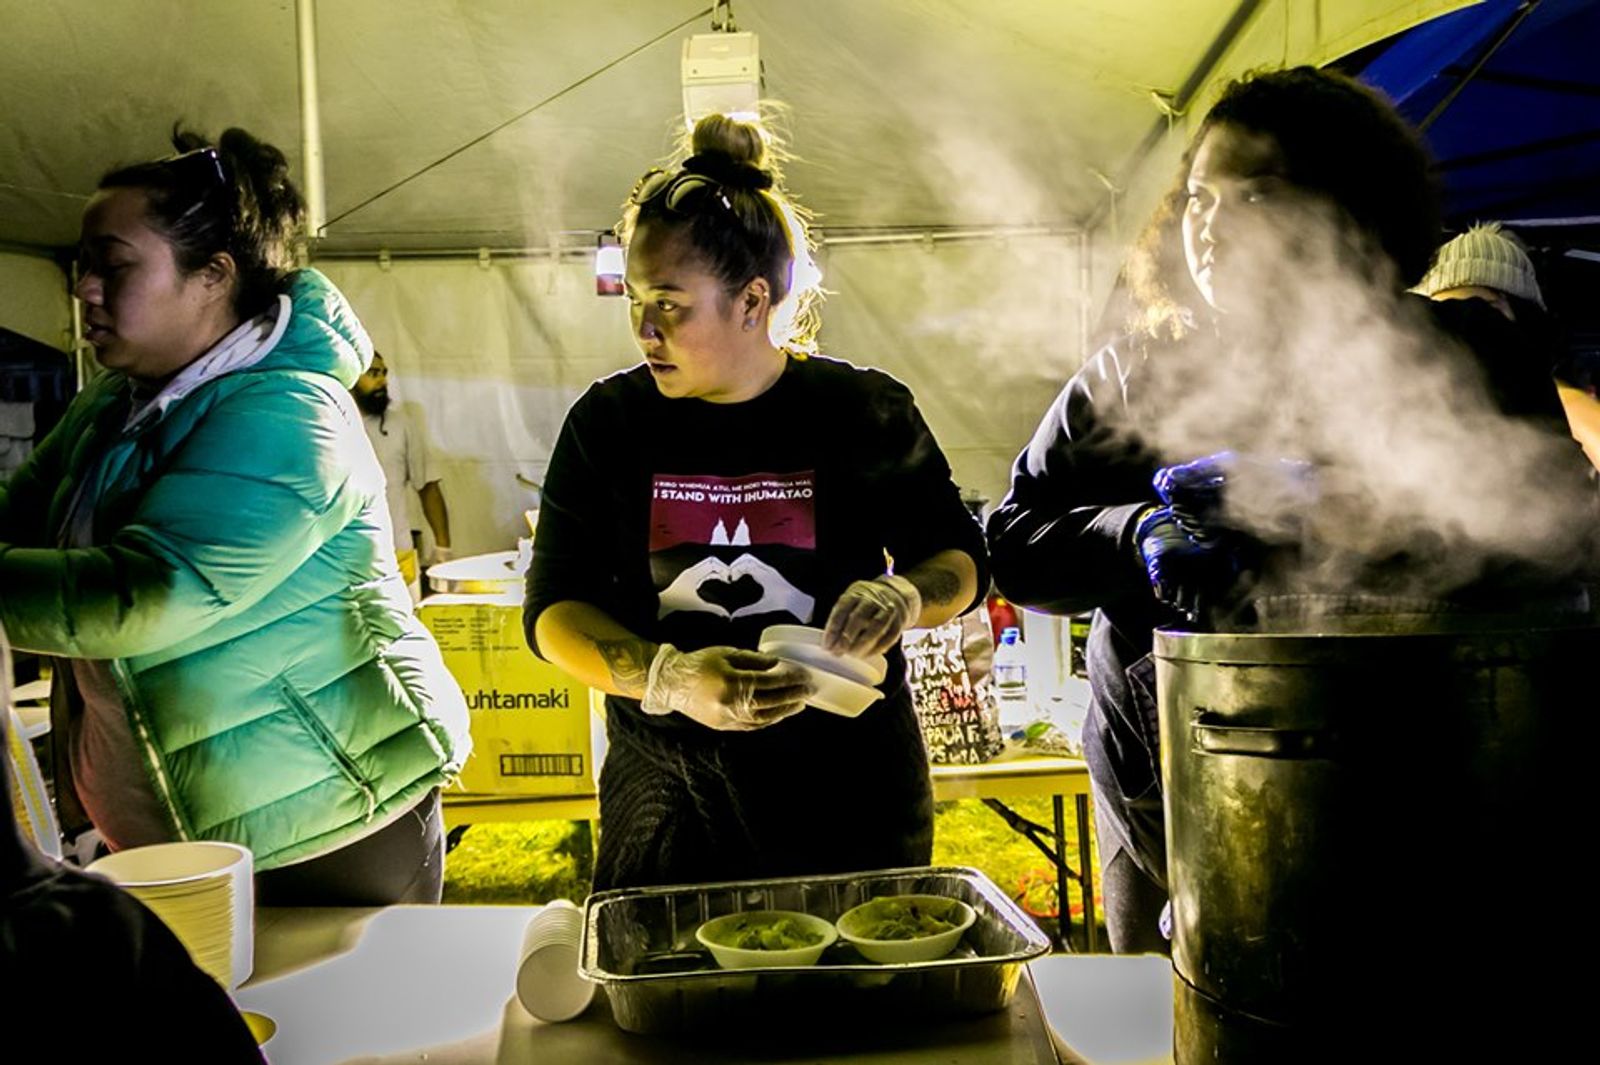 © Serena Stevenson - Volunteers work 24 hours to feed protestors from locally donated food.